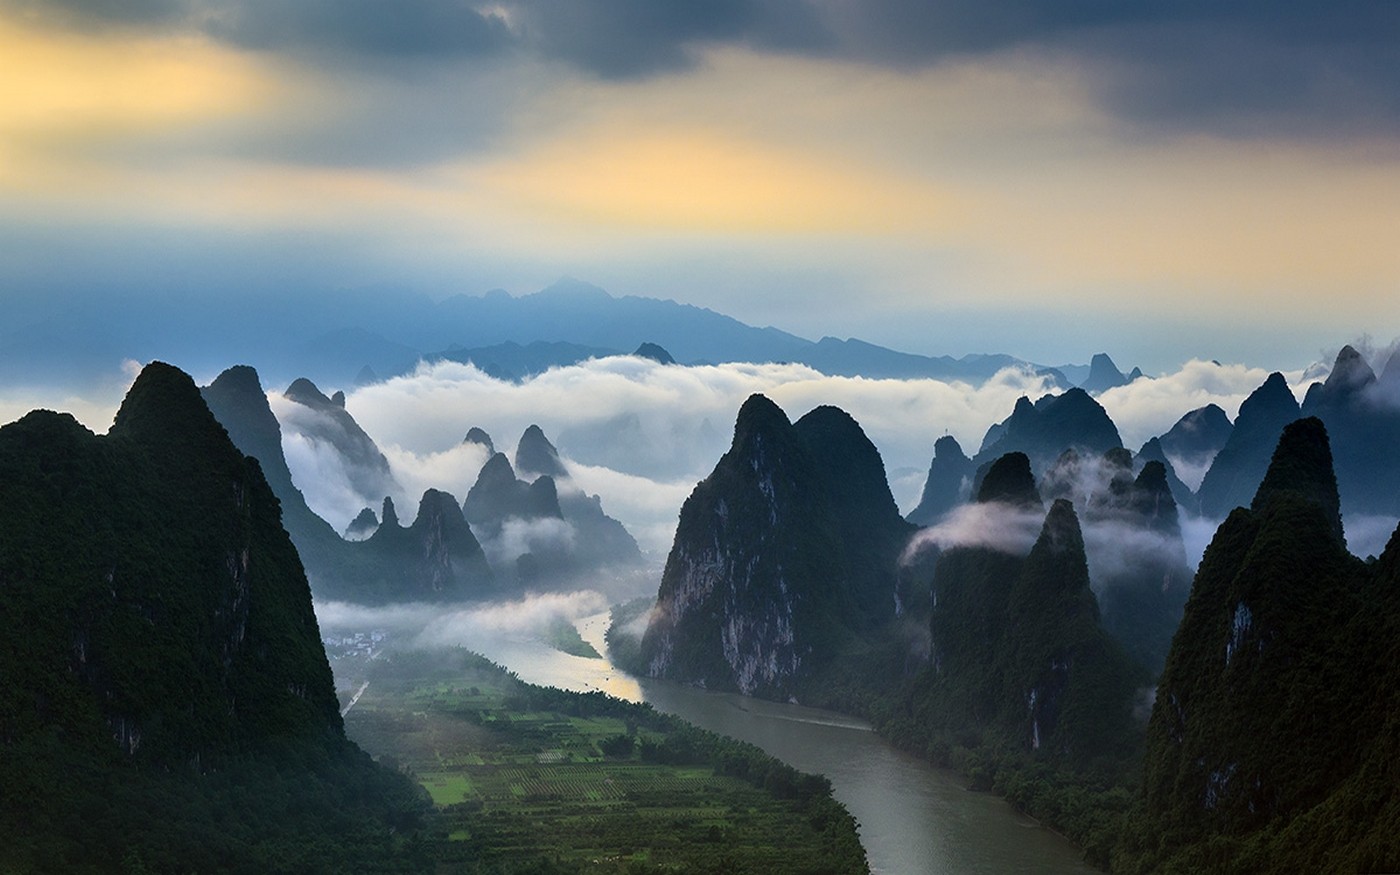 General 1400x875 nature landscape mountains river field China clouds mist Asia